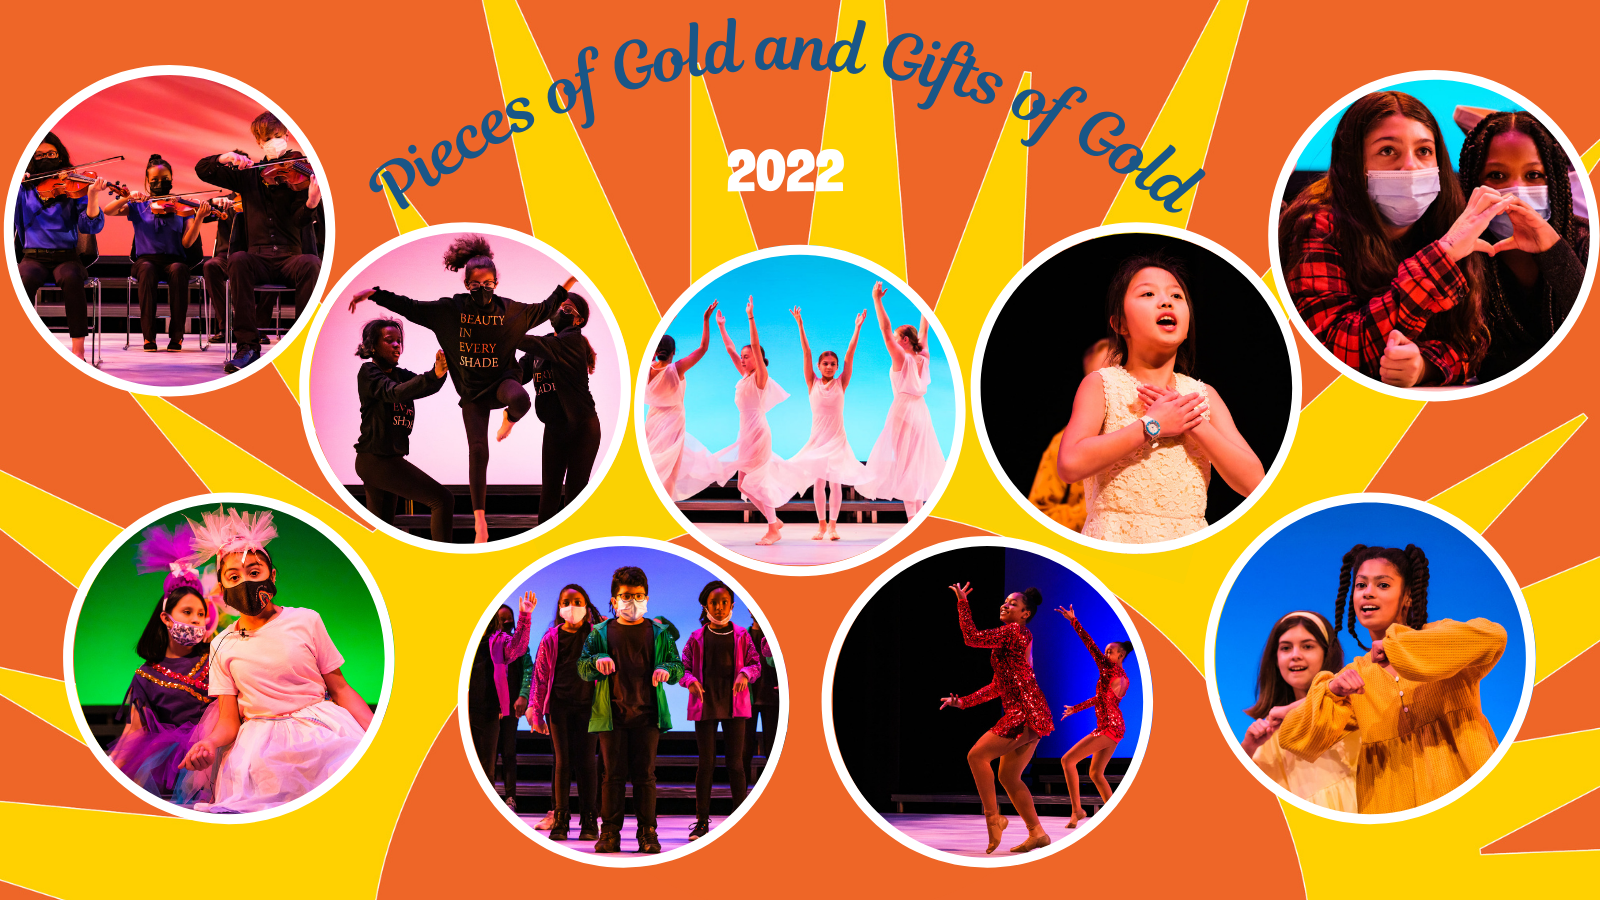 Students in circle graphics performing duing Pieces of Gold with Orange and yellow sun background